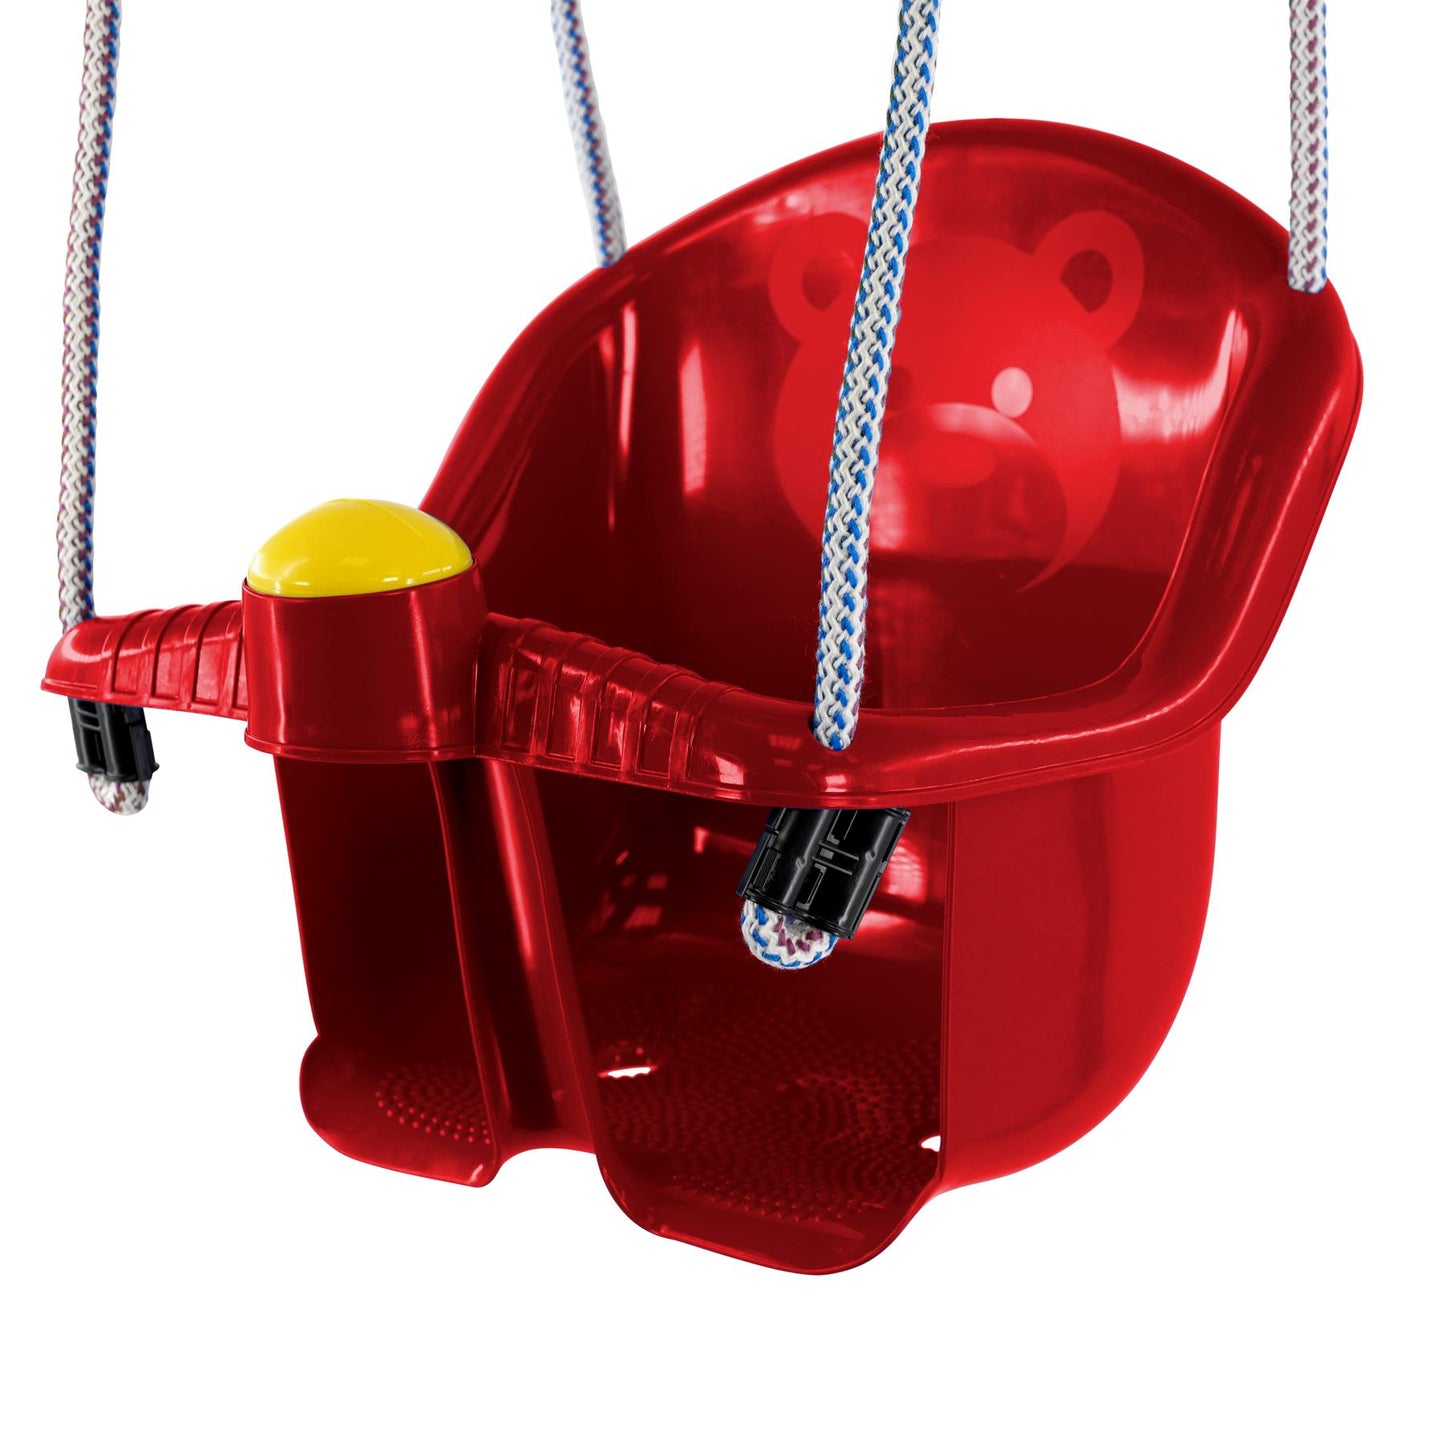 Red Children's Safety Swing Seat by MTS - UKBuyZone